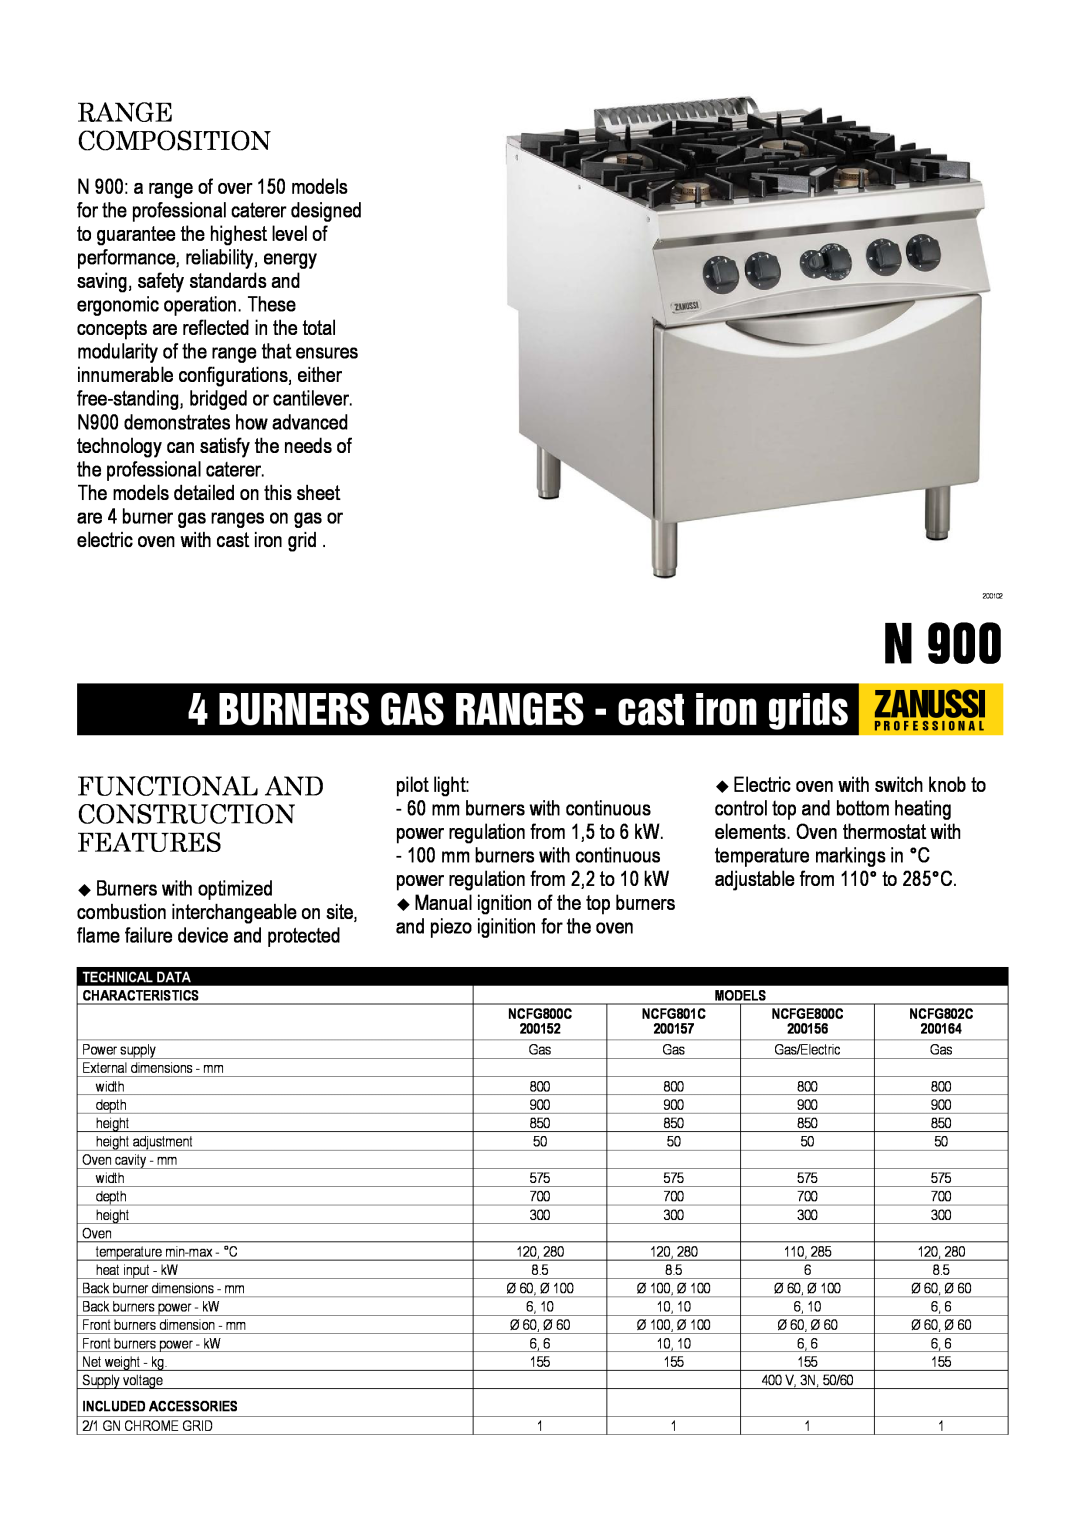 Zanussi NCFG801C, NCFGE800C, NCFG802C dimensions pilot light, Range Composition, Functional And Construction Features 